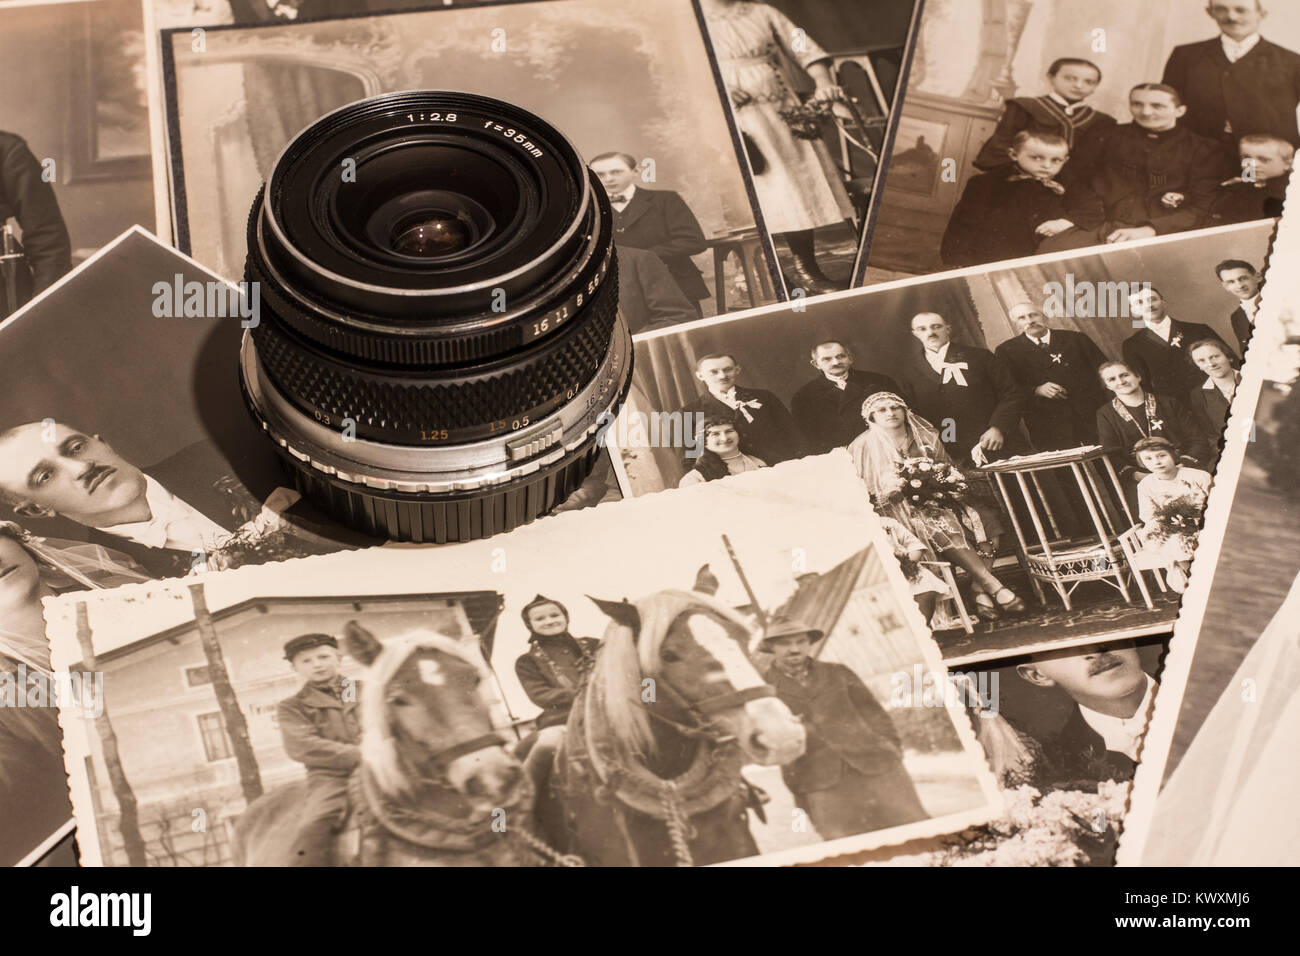 Vintage photographs next to an old camera lens Stock Photo